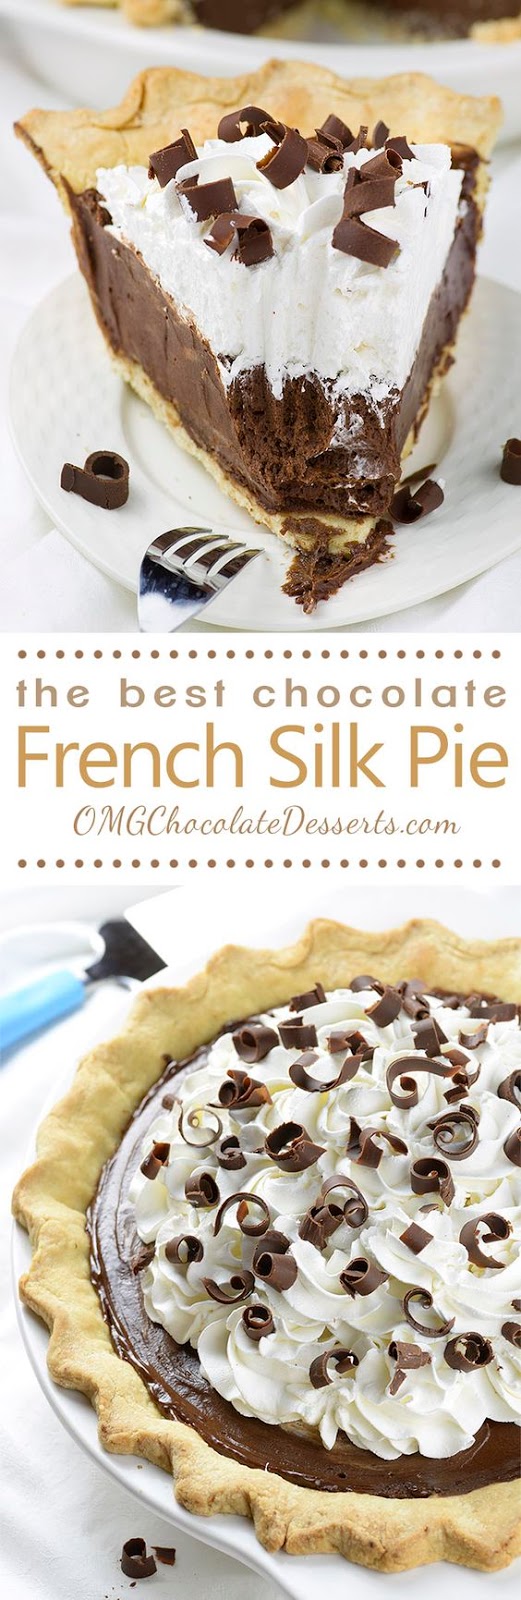 French Silk Pie - Healthy Living and Lifestyle